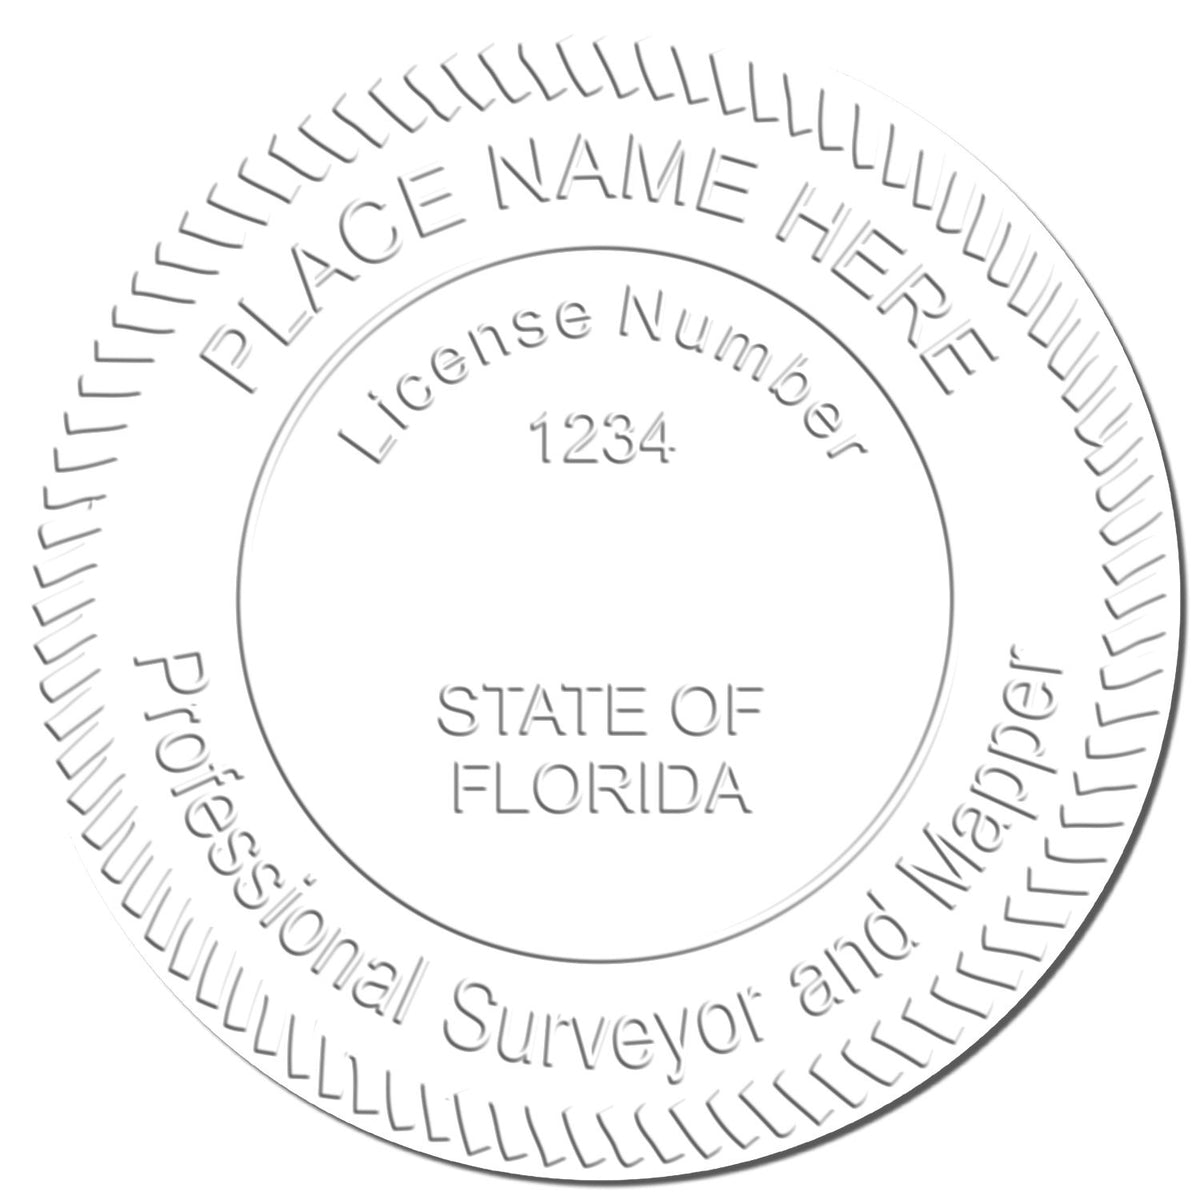 This paper is stamped with a sample imprint of the Hybrid Florida Land Surveyor Seal, signifying its quality and reliability.